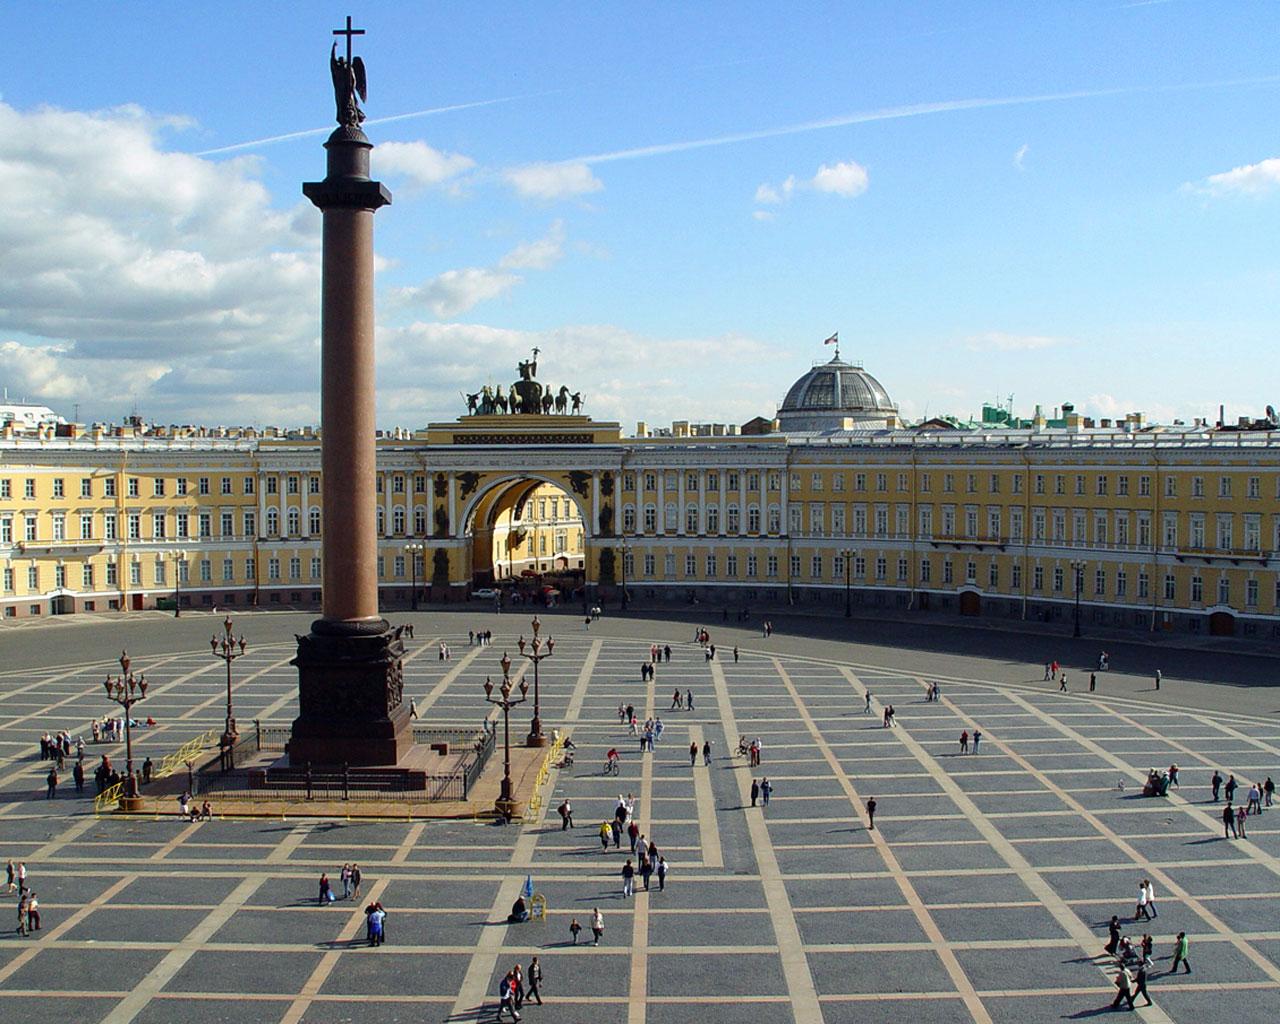 St Petersburg - Palace Square Wallpaper #4 1280 x 1024 